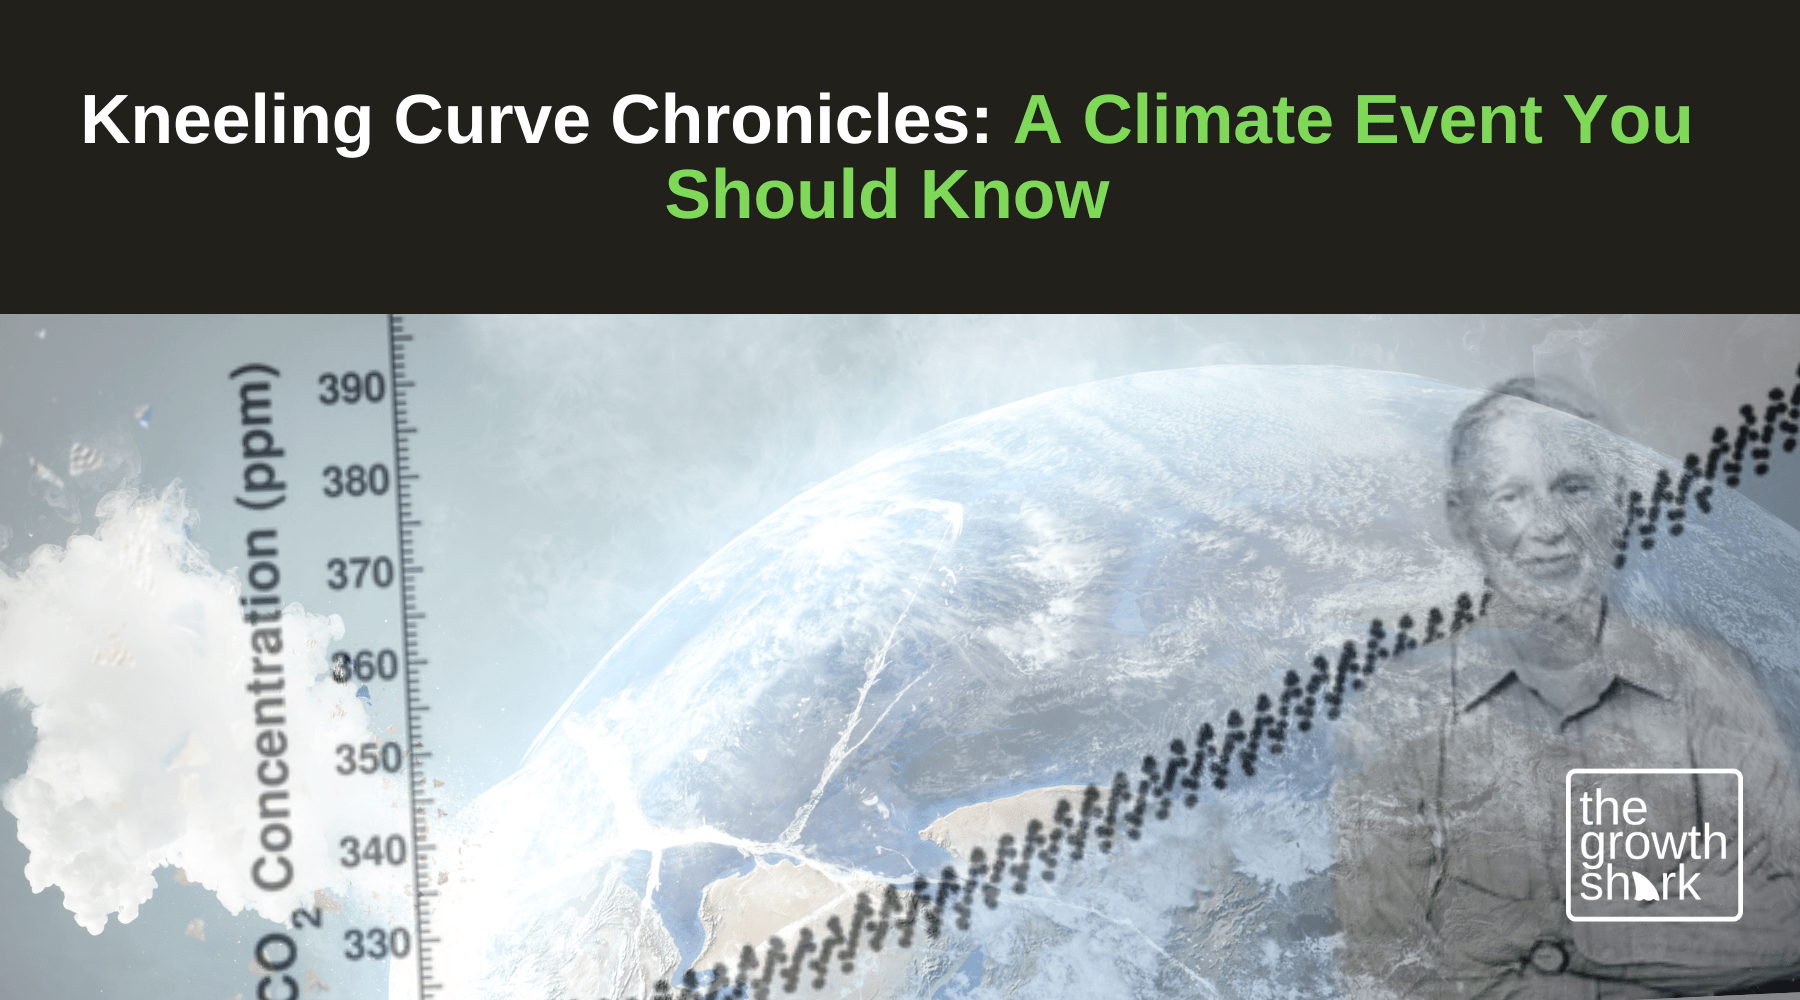 Kneeling Curve Chronicles: A Climate Event You Should Hear